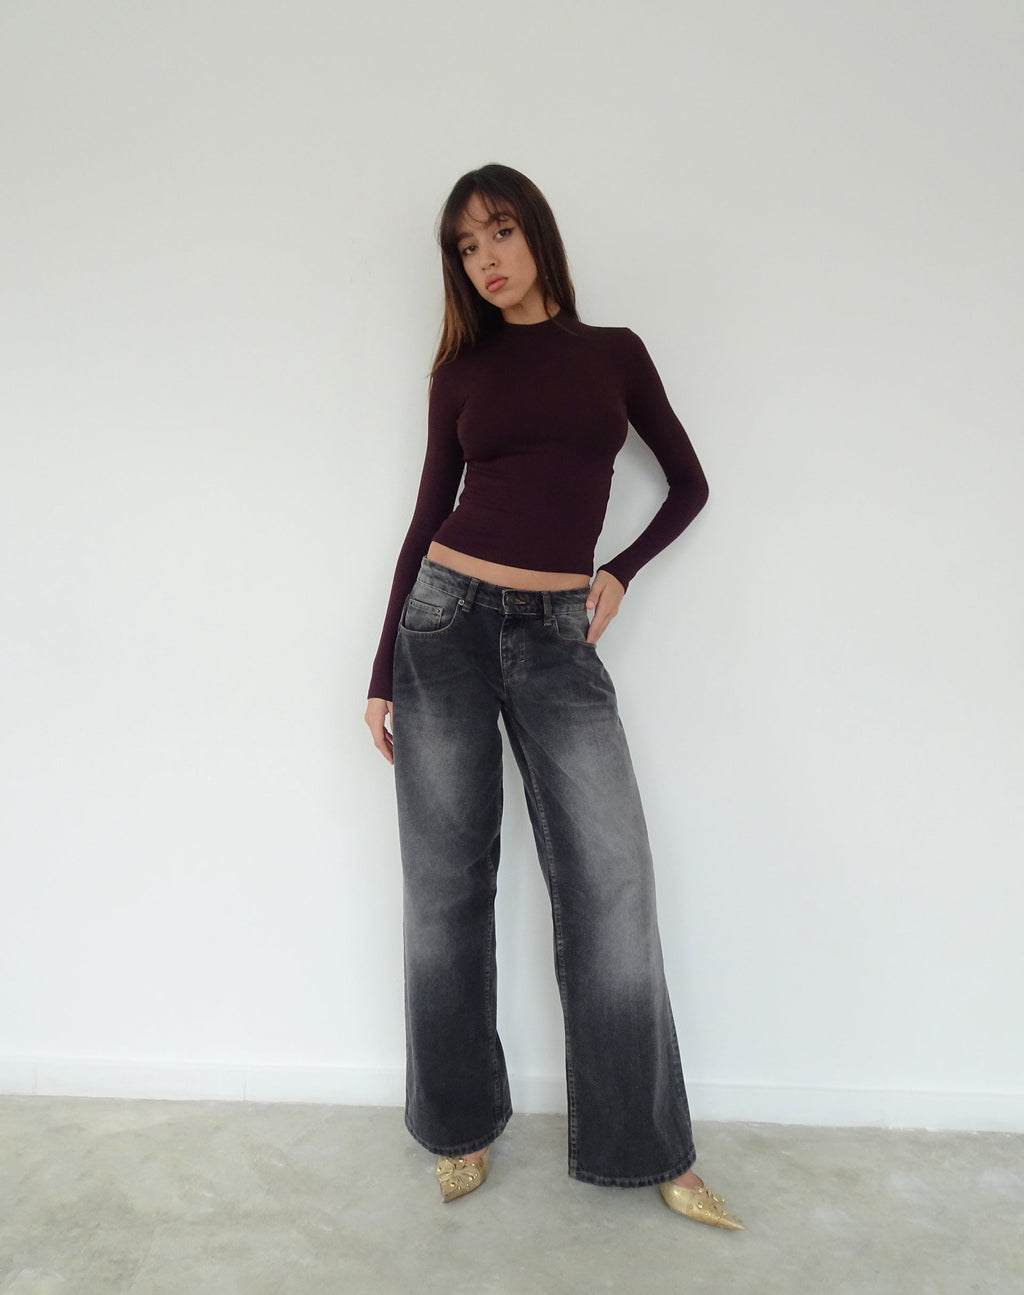 Mabel High-Neck Long Sleeve Ribbed Top in Oxblood